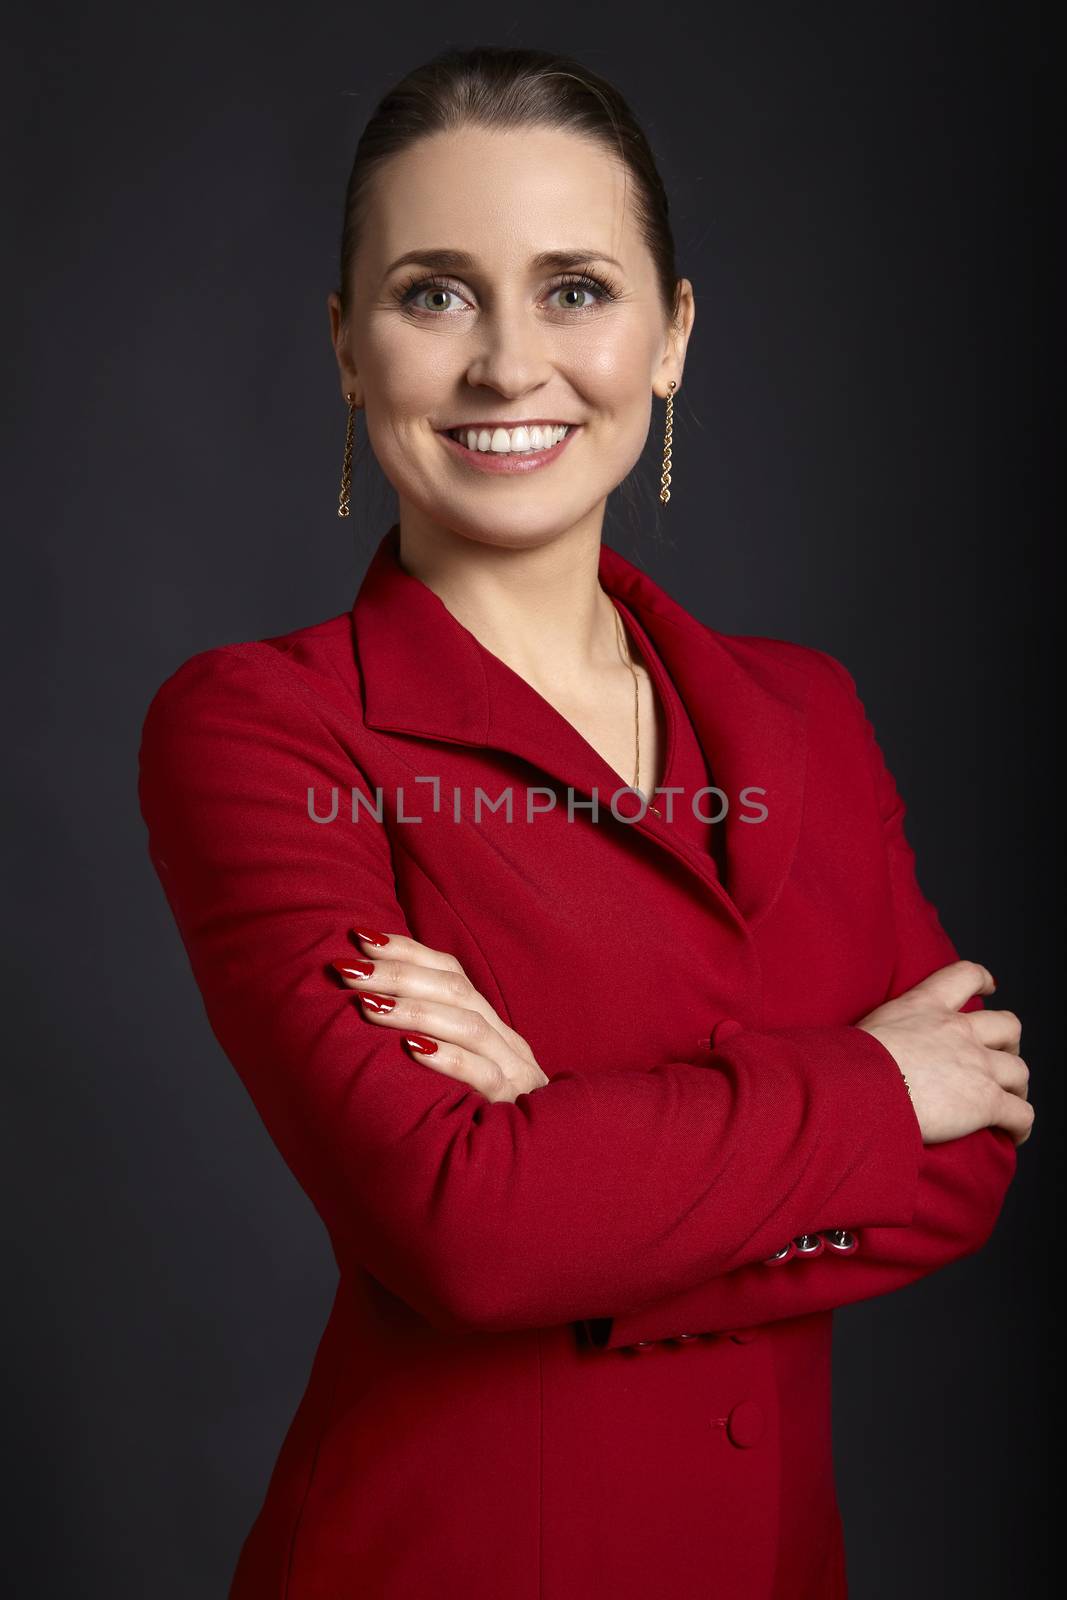 Portrait of elegant young business woman in red jacket with white smile and crossed arms, on black background.